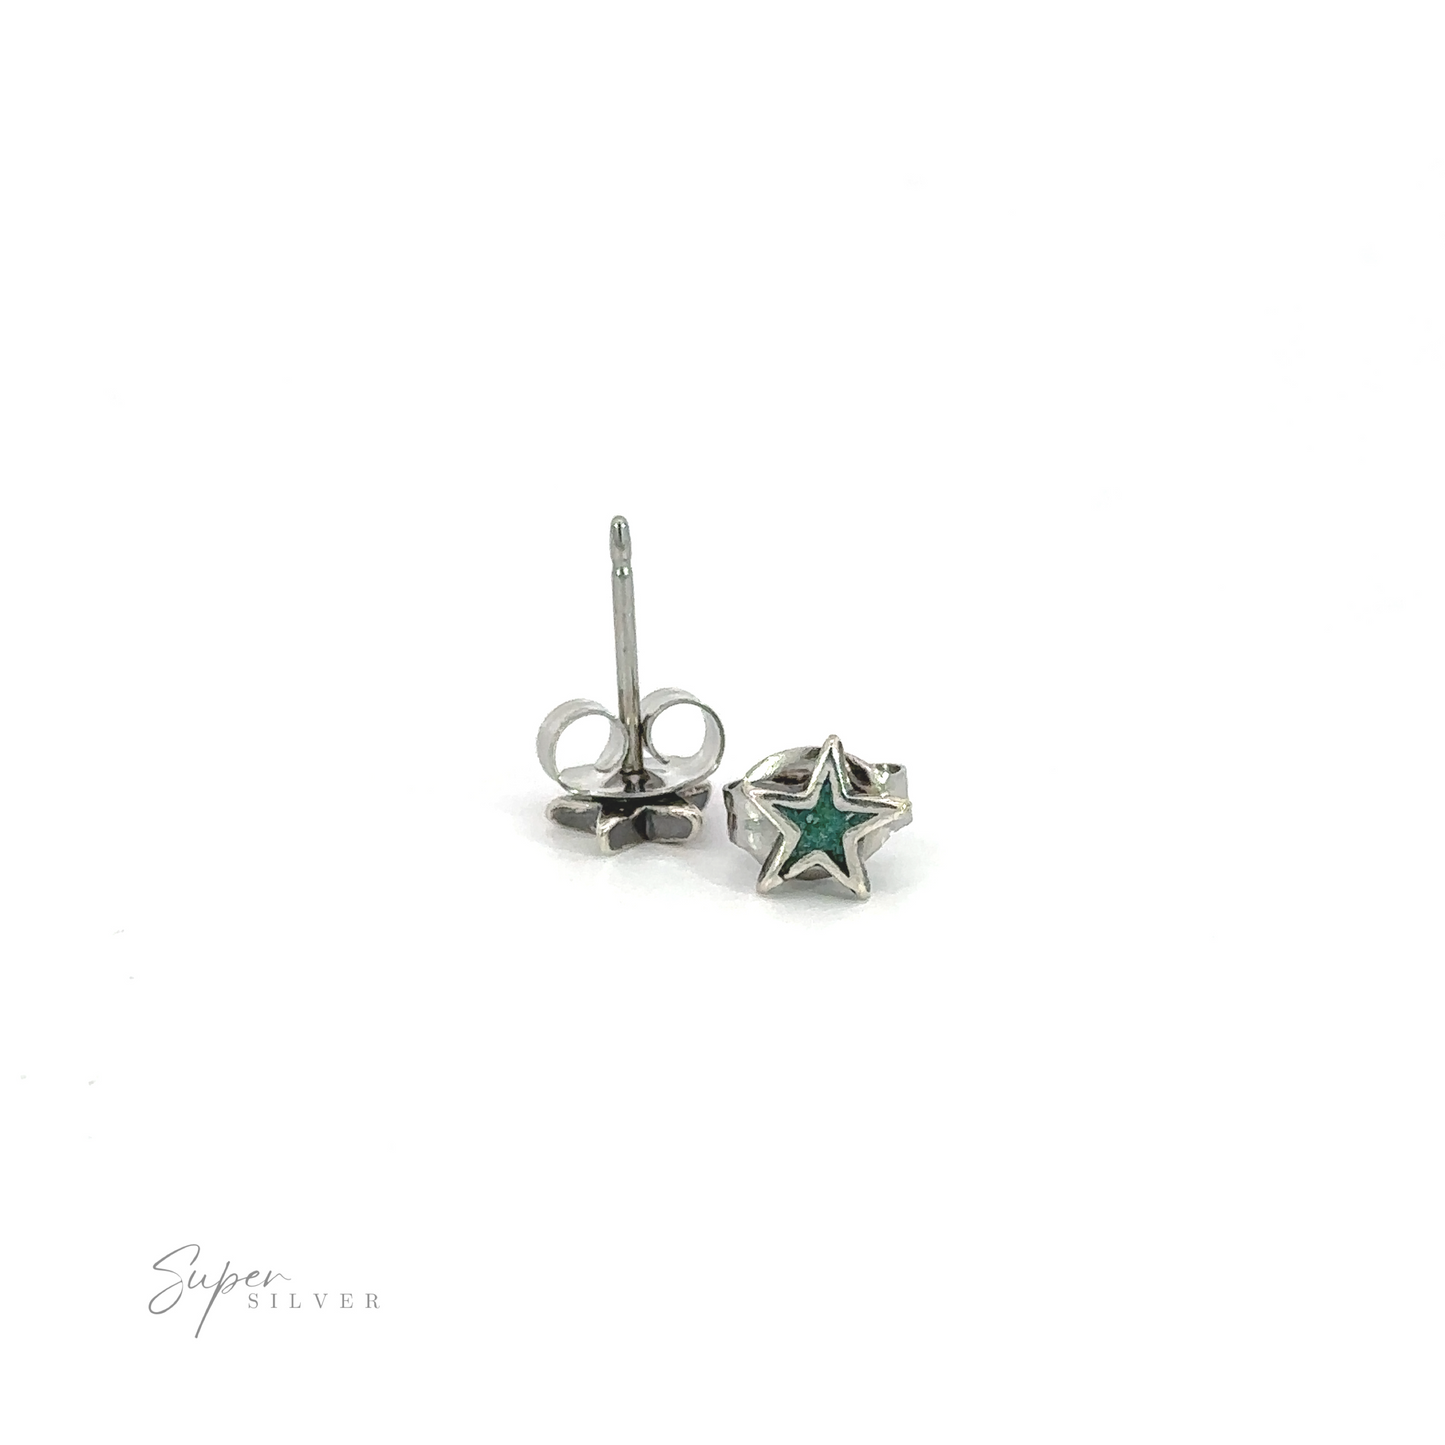 Tiny Turquoise Star Studs meet the shimmering allure of emerald star stud earrings in sterling silver, creating a captivating and stylish accessory.